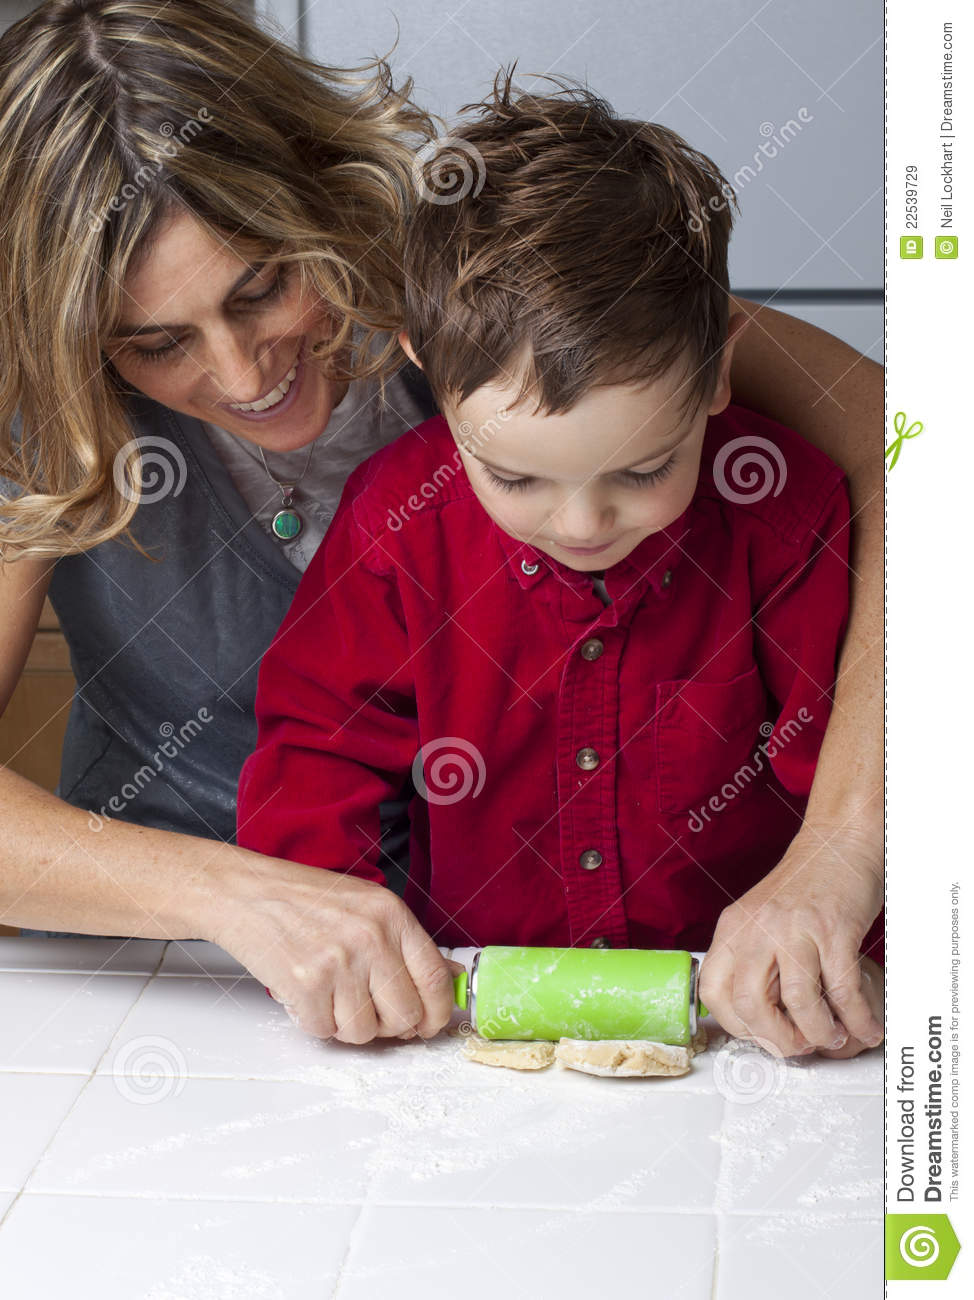 Mother And Son Making Cookies Royalty Free Stock Images   Image    